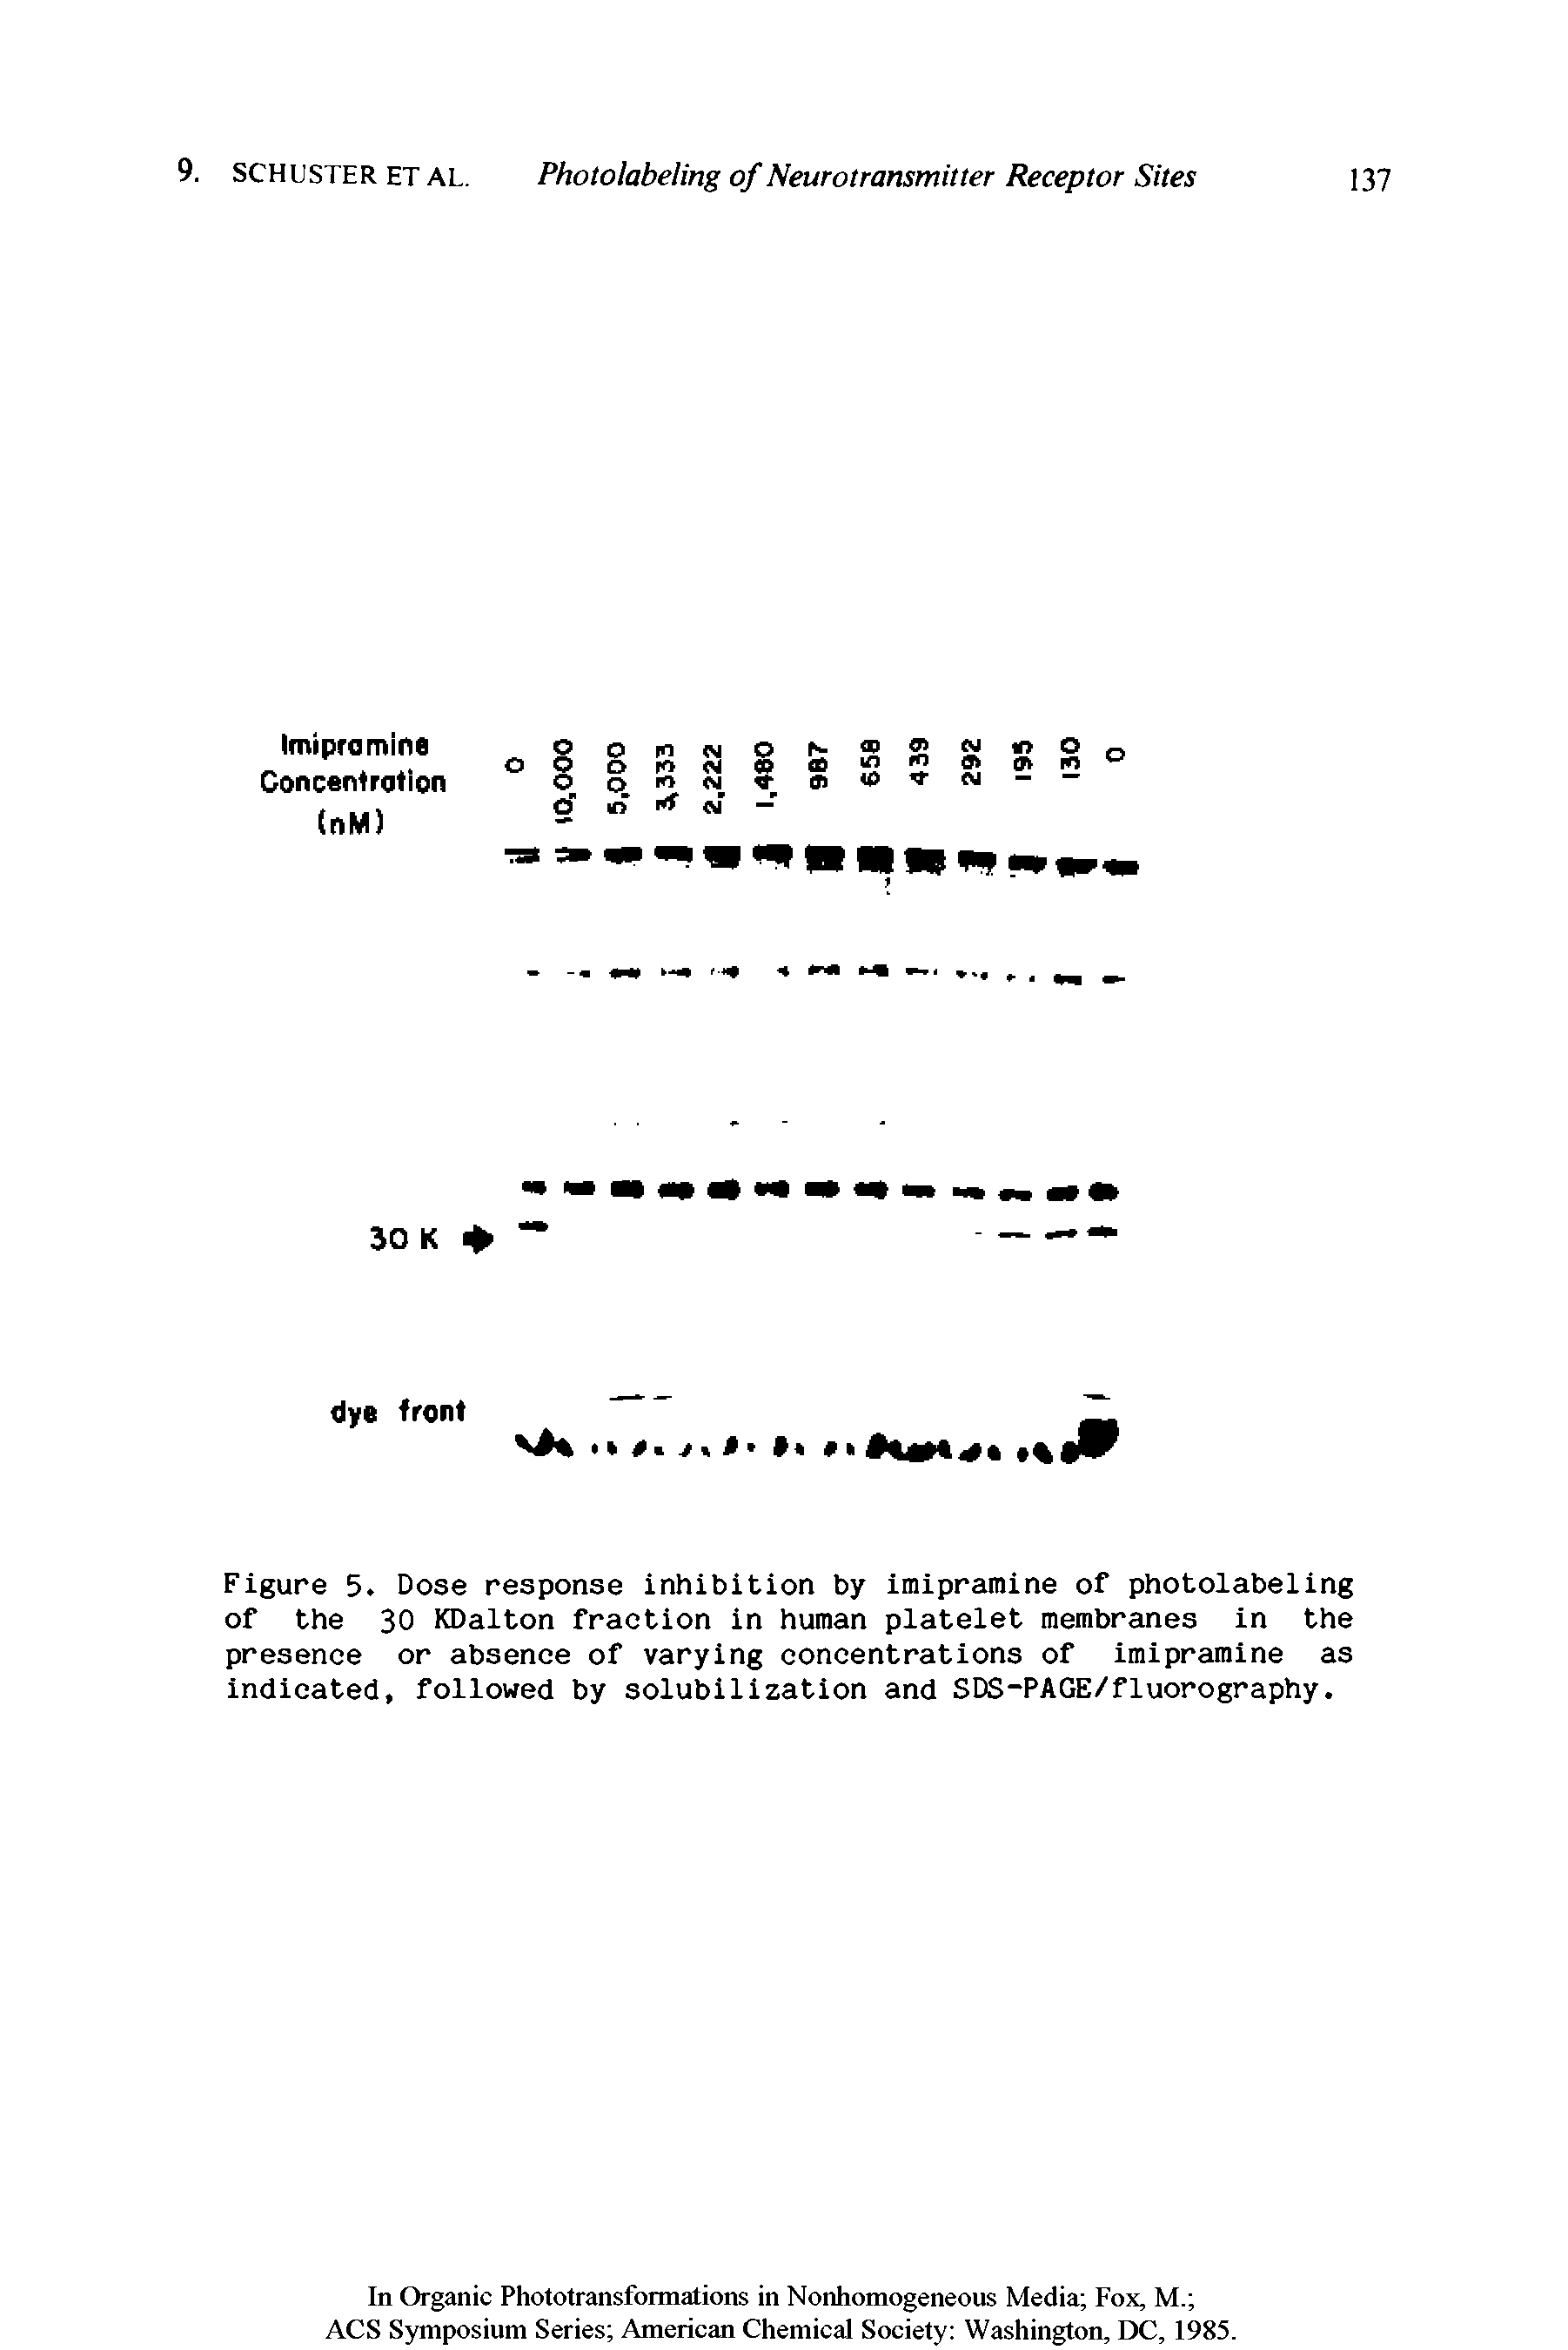 Figure 5. Dose response inhibition by imipramine of photolabeling of the 30 KDalton fraction in human platelet membranes in the presence or absence of varying concentrations of imipramine as indicated, followed by solubilization and SDS-PAGE/fluorography.